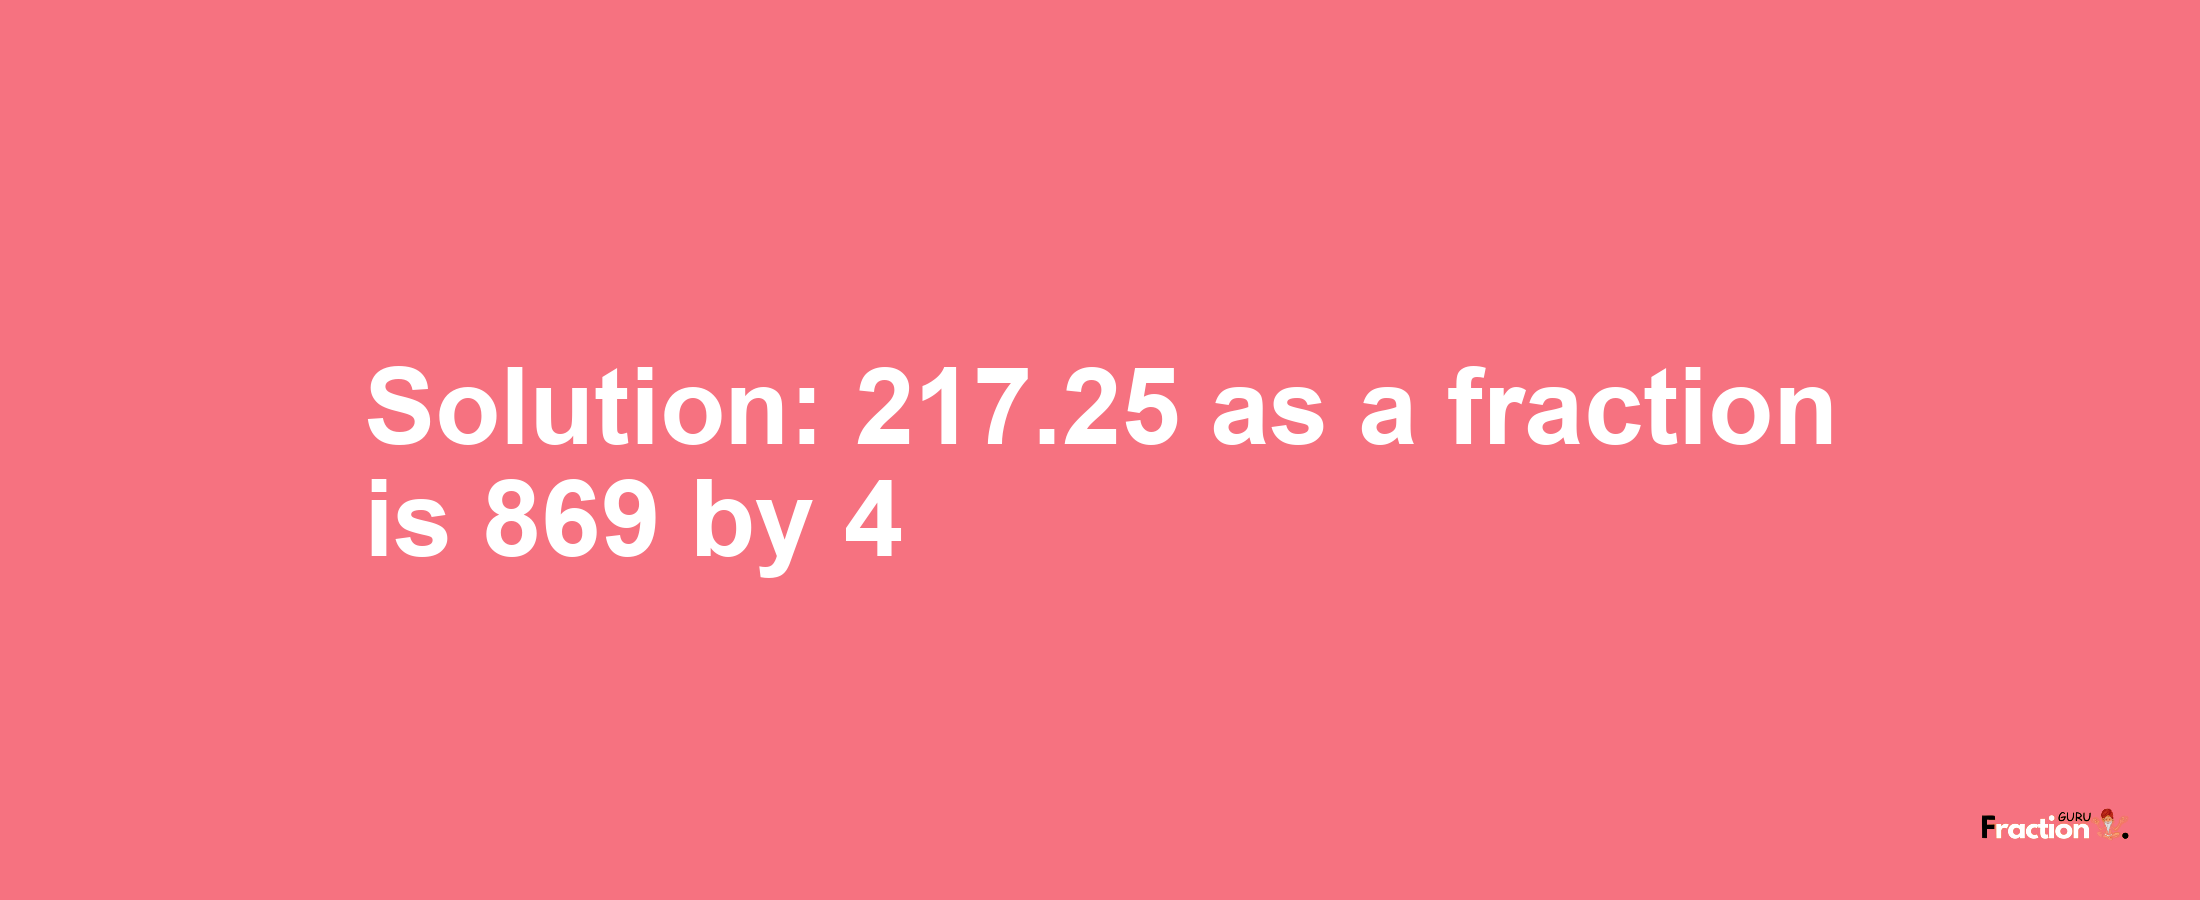 Solution:217.25 as a fraction is 869/4